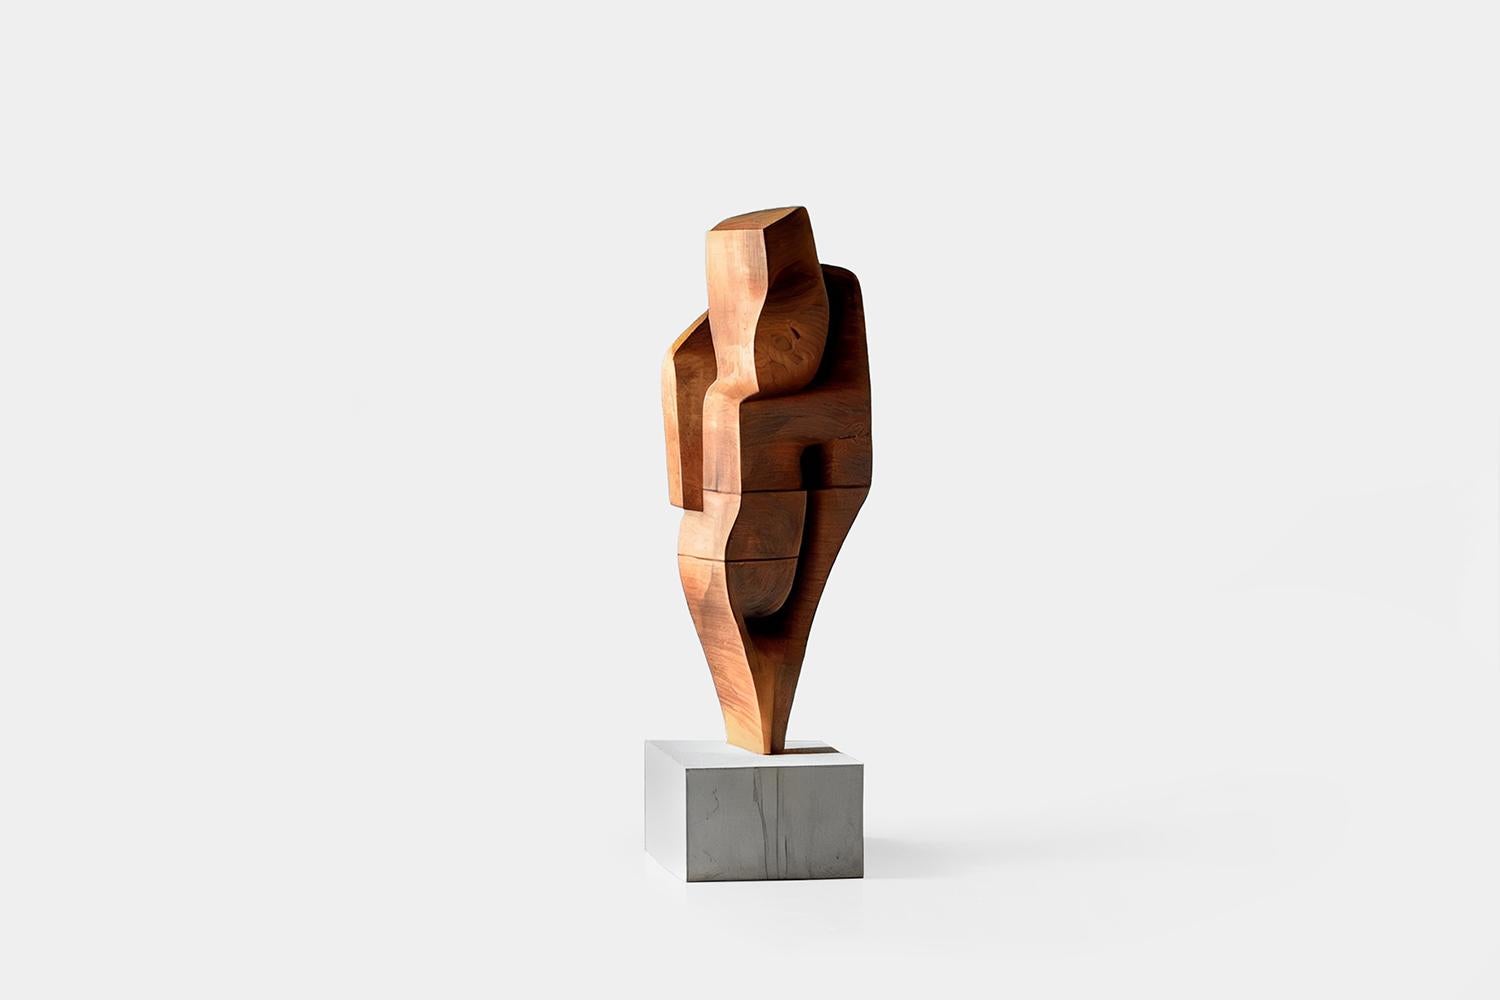 Abstract wood sculpture in the Flair of Scandinavian Art, Unseen Force by Joel Escalona.

This monolithic sculpture, designed by the talented Artist Joel Escalona, is a towering example of beauty in craftsmanship. Hand and digital machine made;